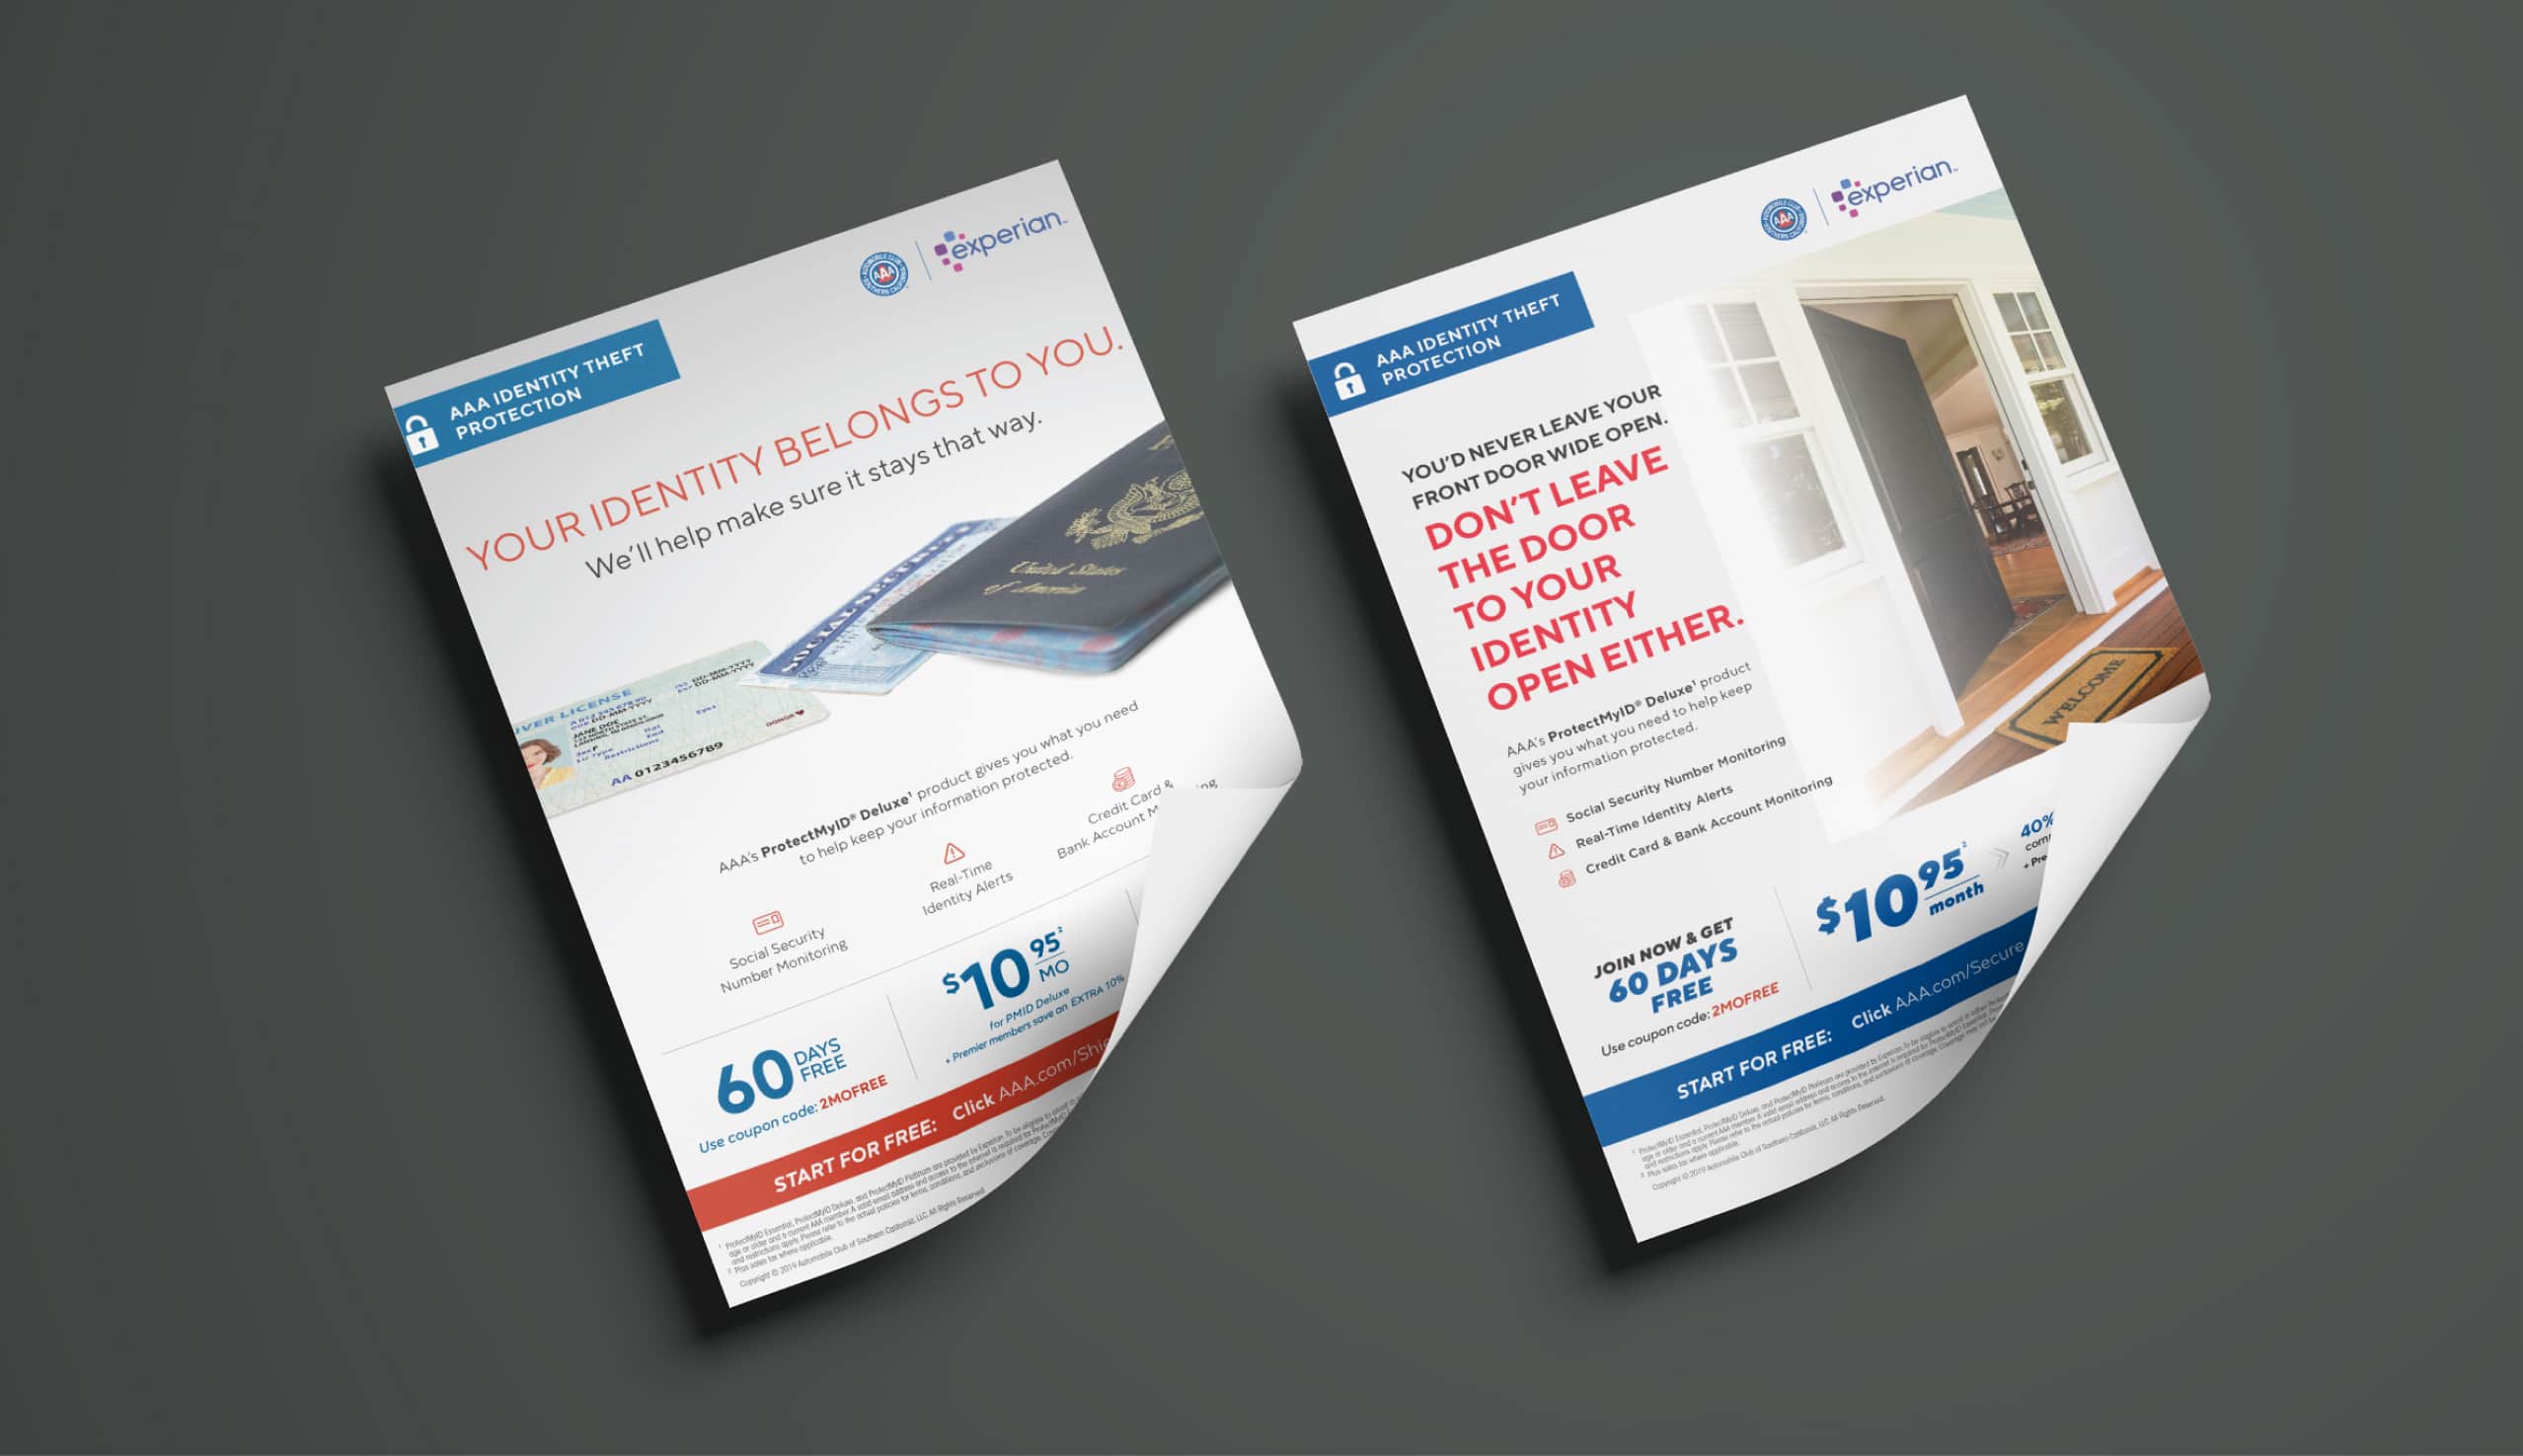 A tri-fold brochure for identity protection services, lying flat, displaying the headline 'Your identity belongs to you' with informational content and pricing below. There is also an angled view of a tri-fold brochure for identity protection services, partially open, featuring a home's interior on the cover with the tagline 'Don't leave your identity open to theft'.